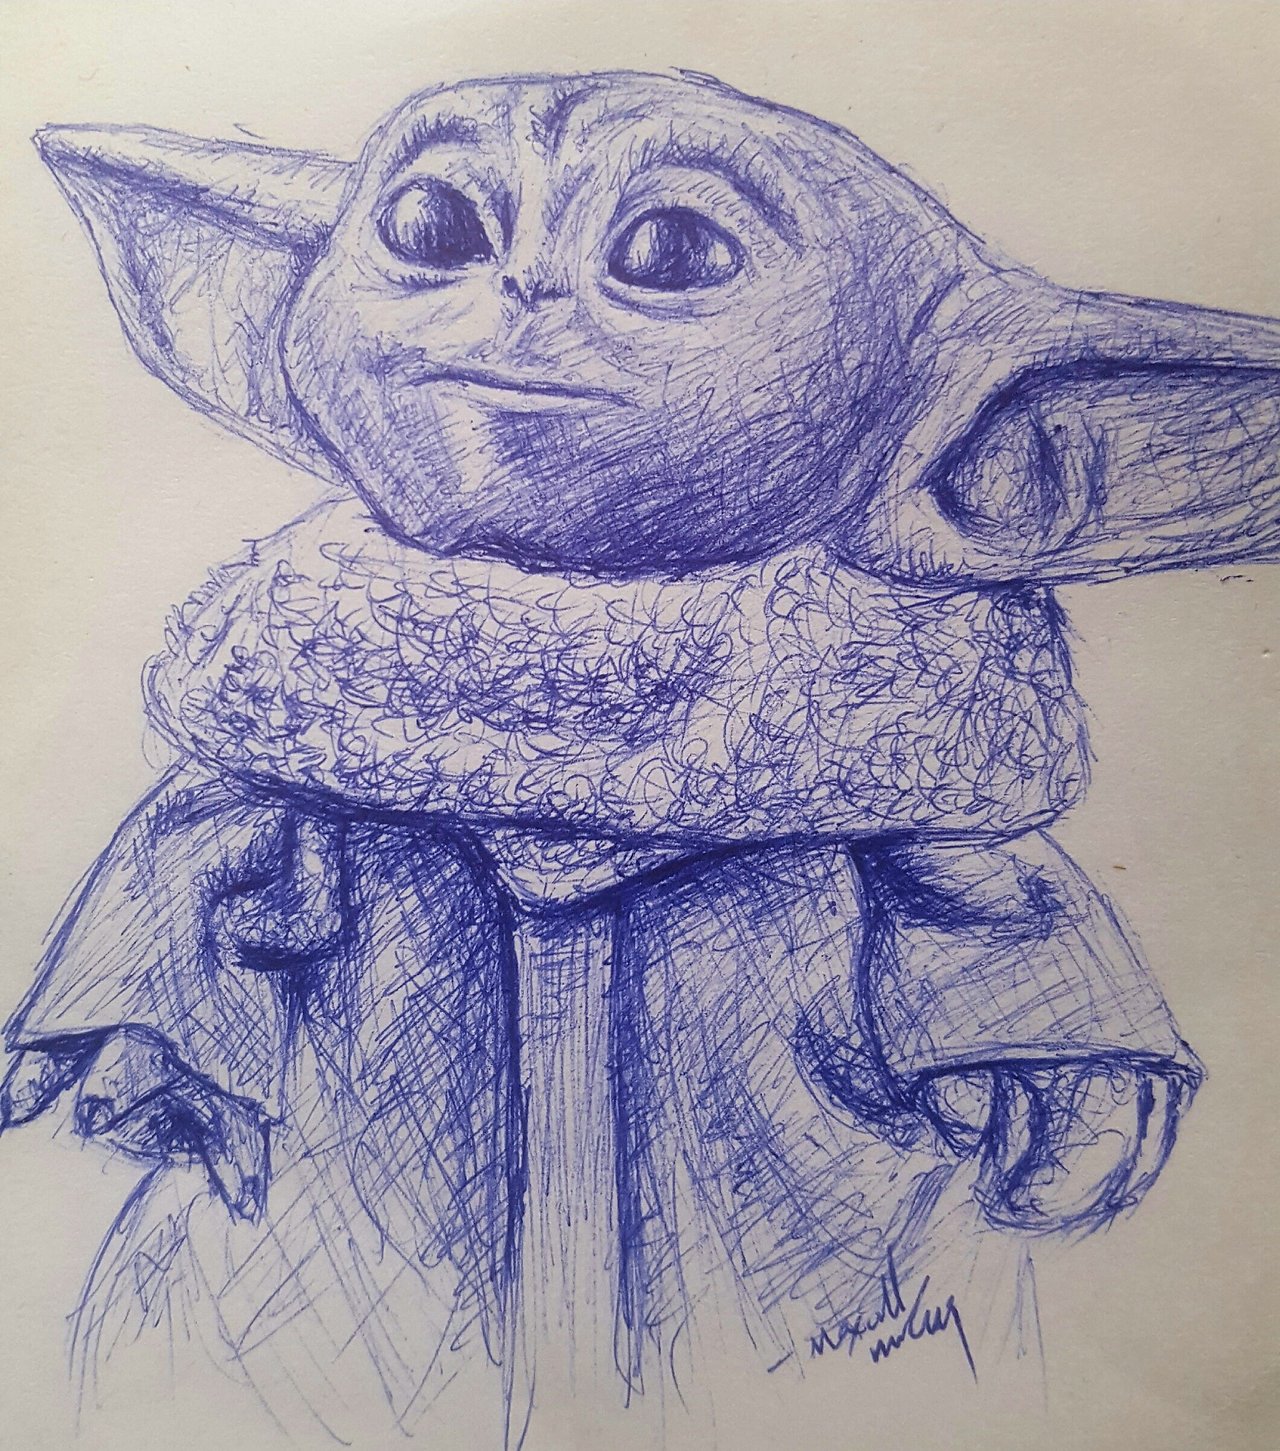 Baby yoda Drawing Reference and Sketches for Artists